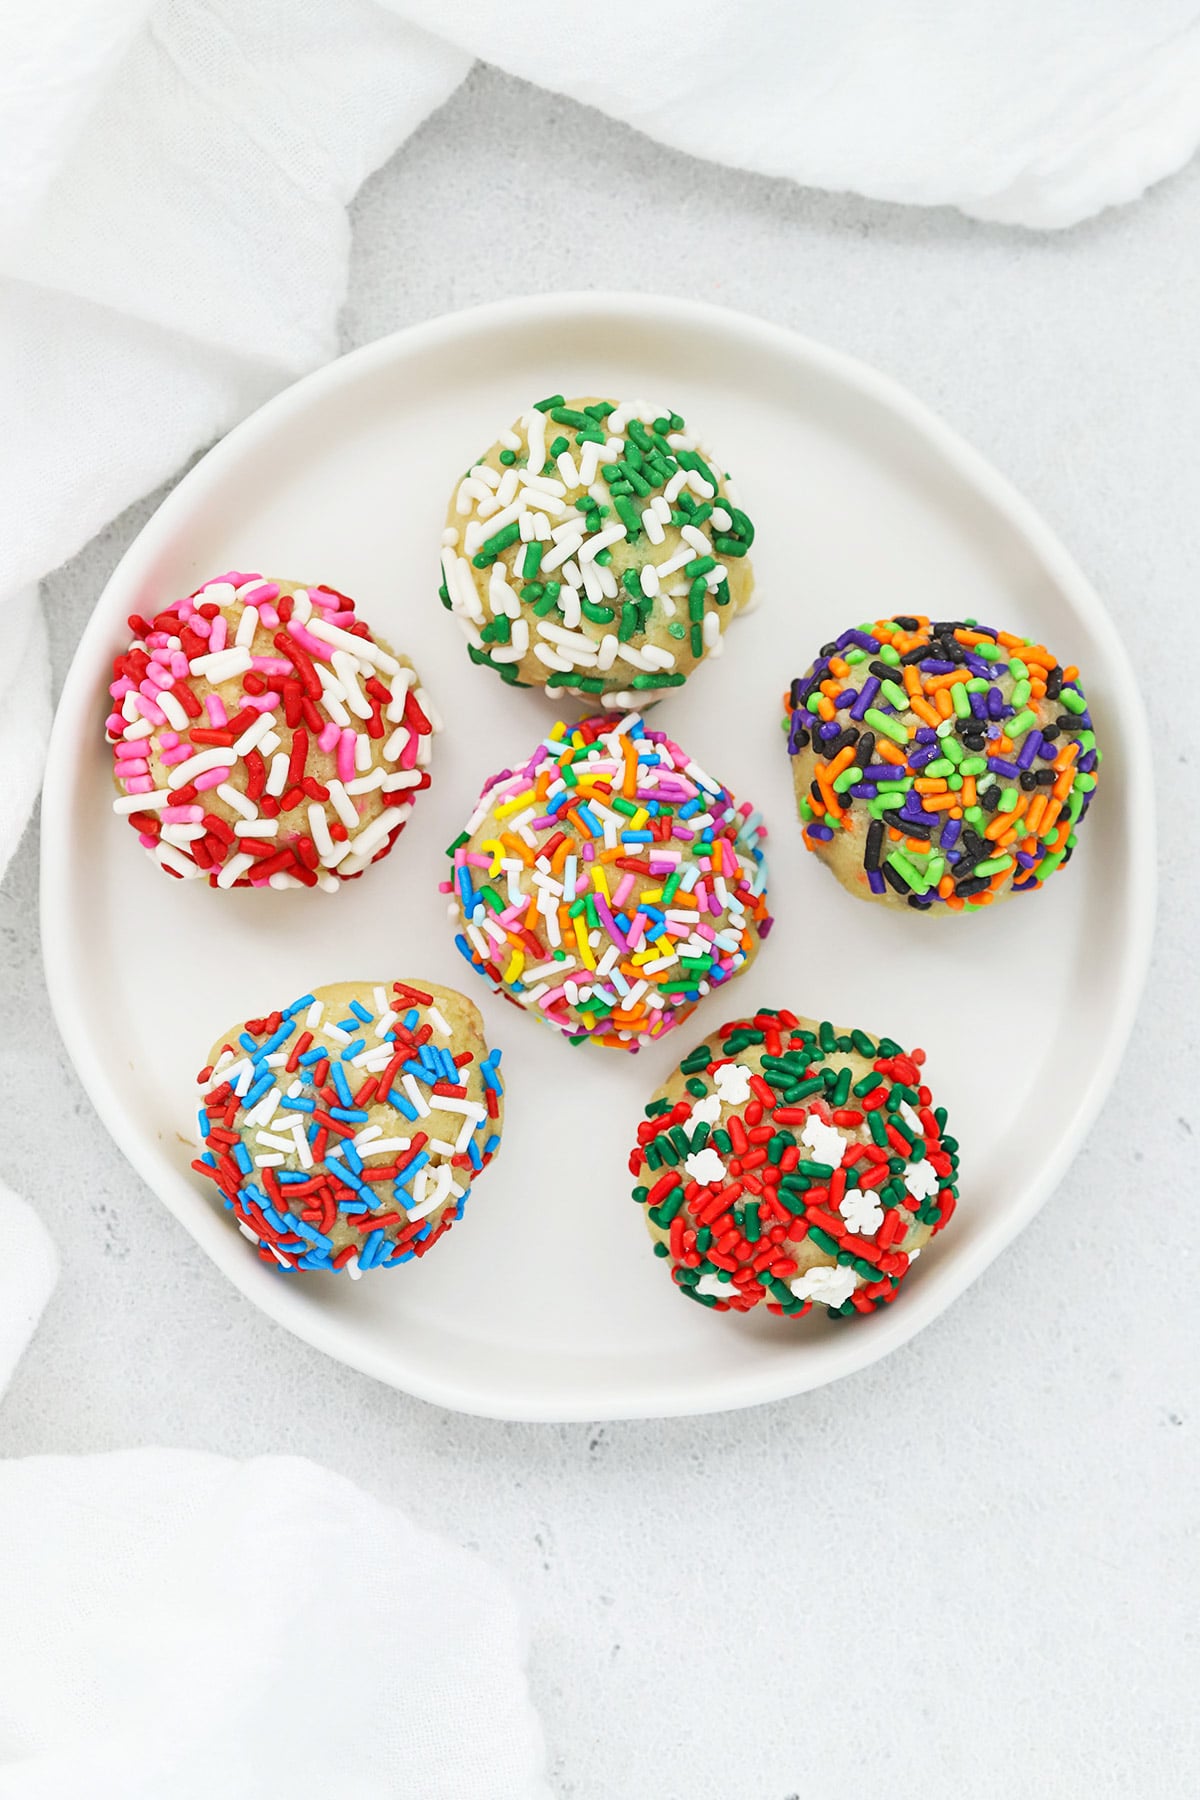 Overhead view of six gluten-free sprinkle sugar cookie dough balls rolled in different colored sprinkles for each holiday--pink, red and white for valentine's day, white and green for st. patrick's day, pastels for Easter, red white and blue for 4th of July, green, black, orange, and purple for halloween, and red, white and green for christmas.